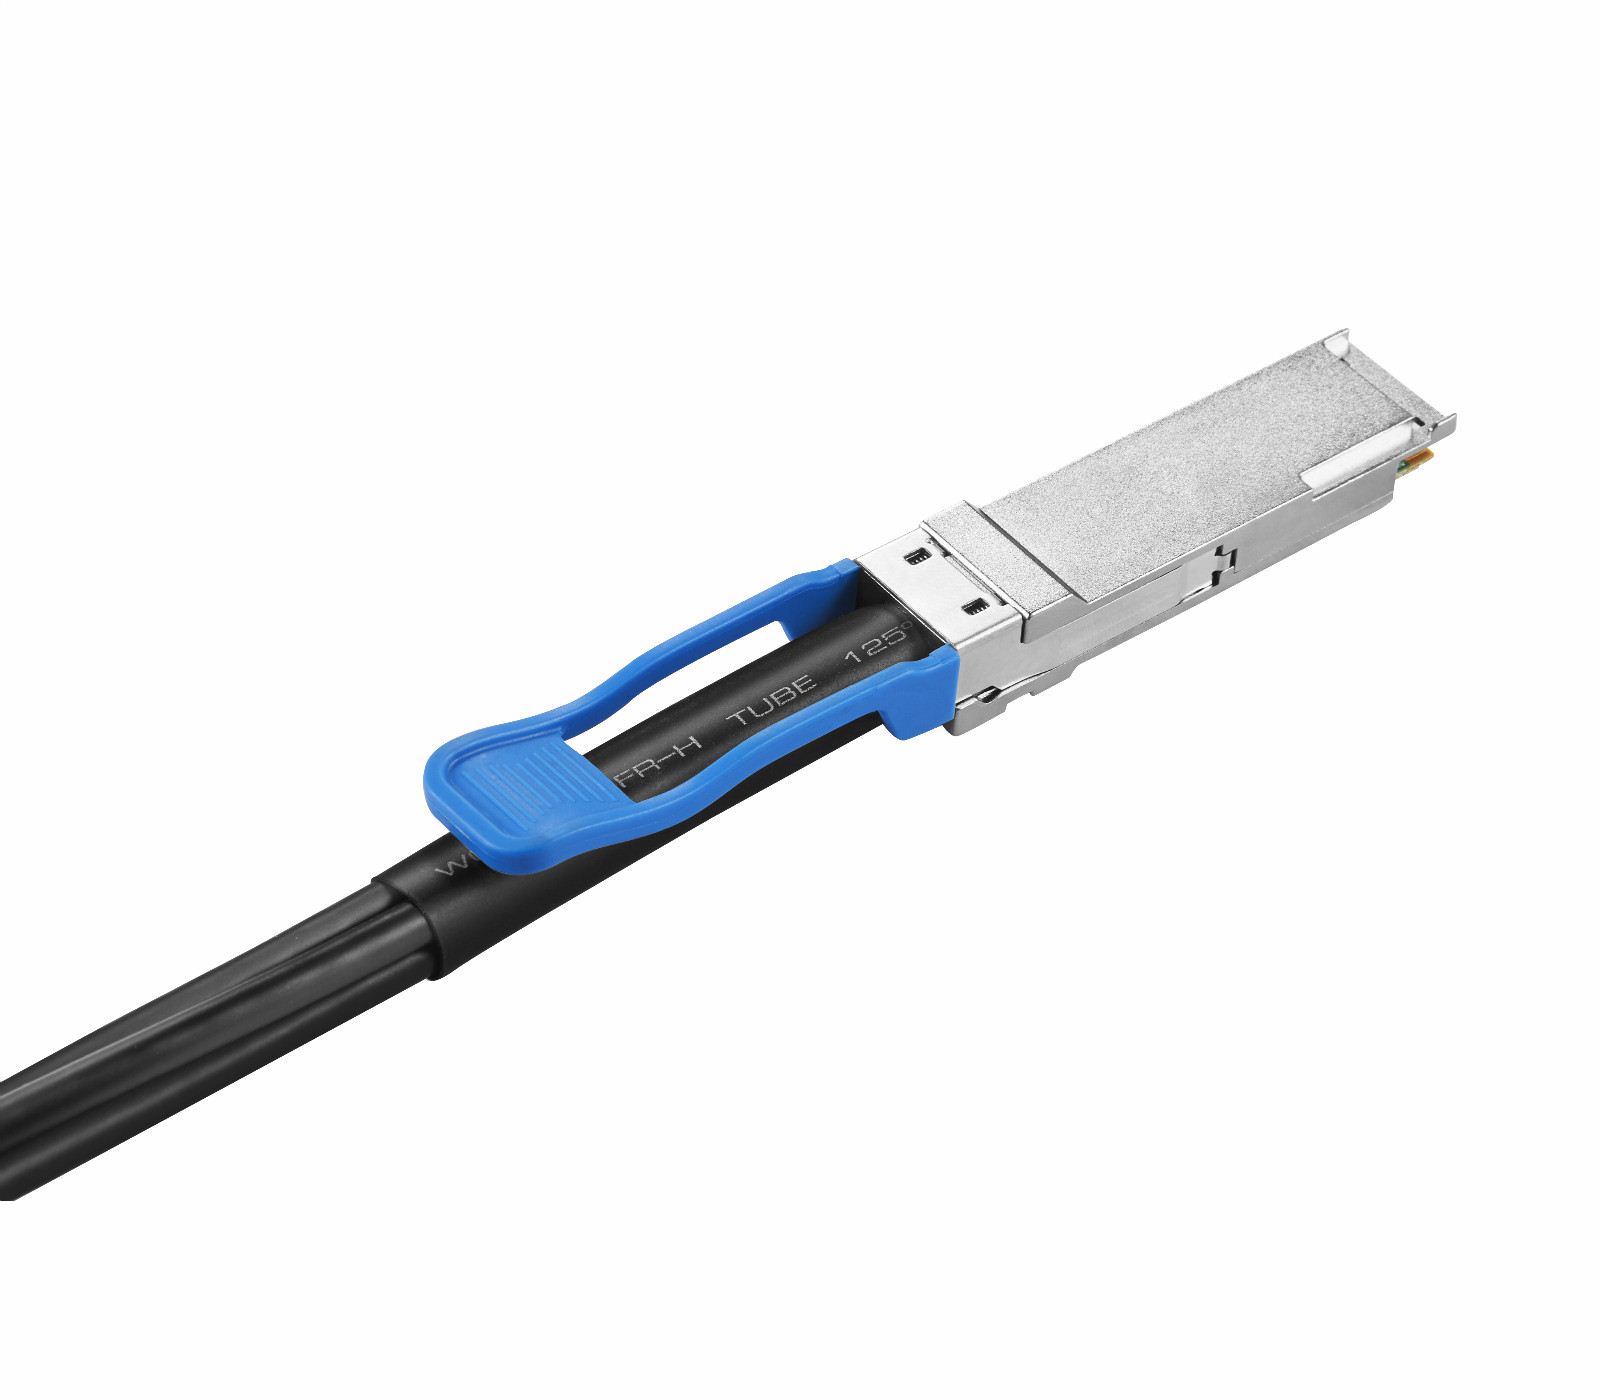 Come here,HTD-Infor has 56G QSFP DAC that meets your need